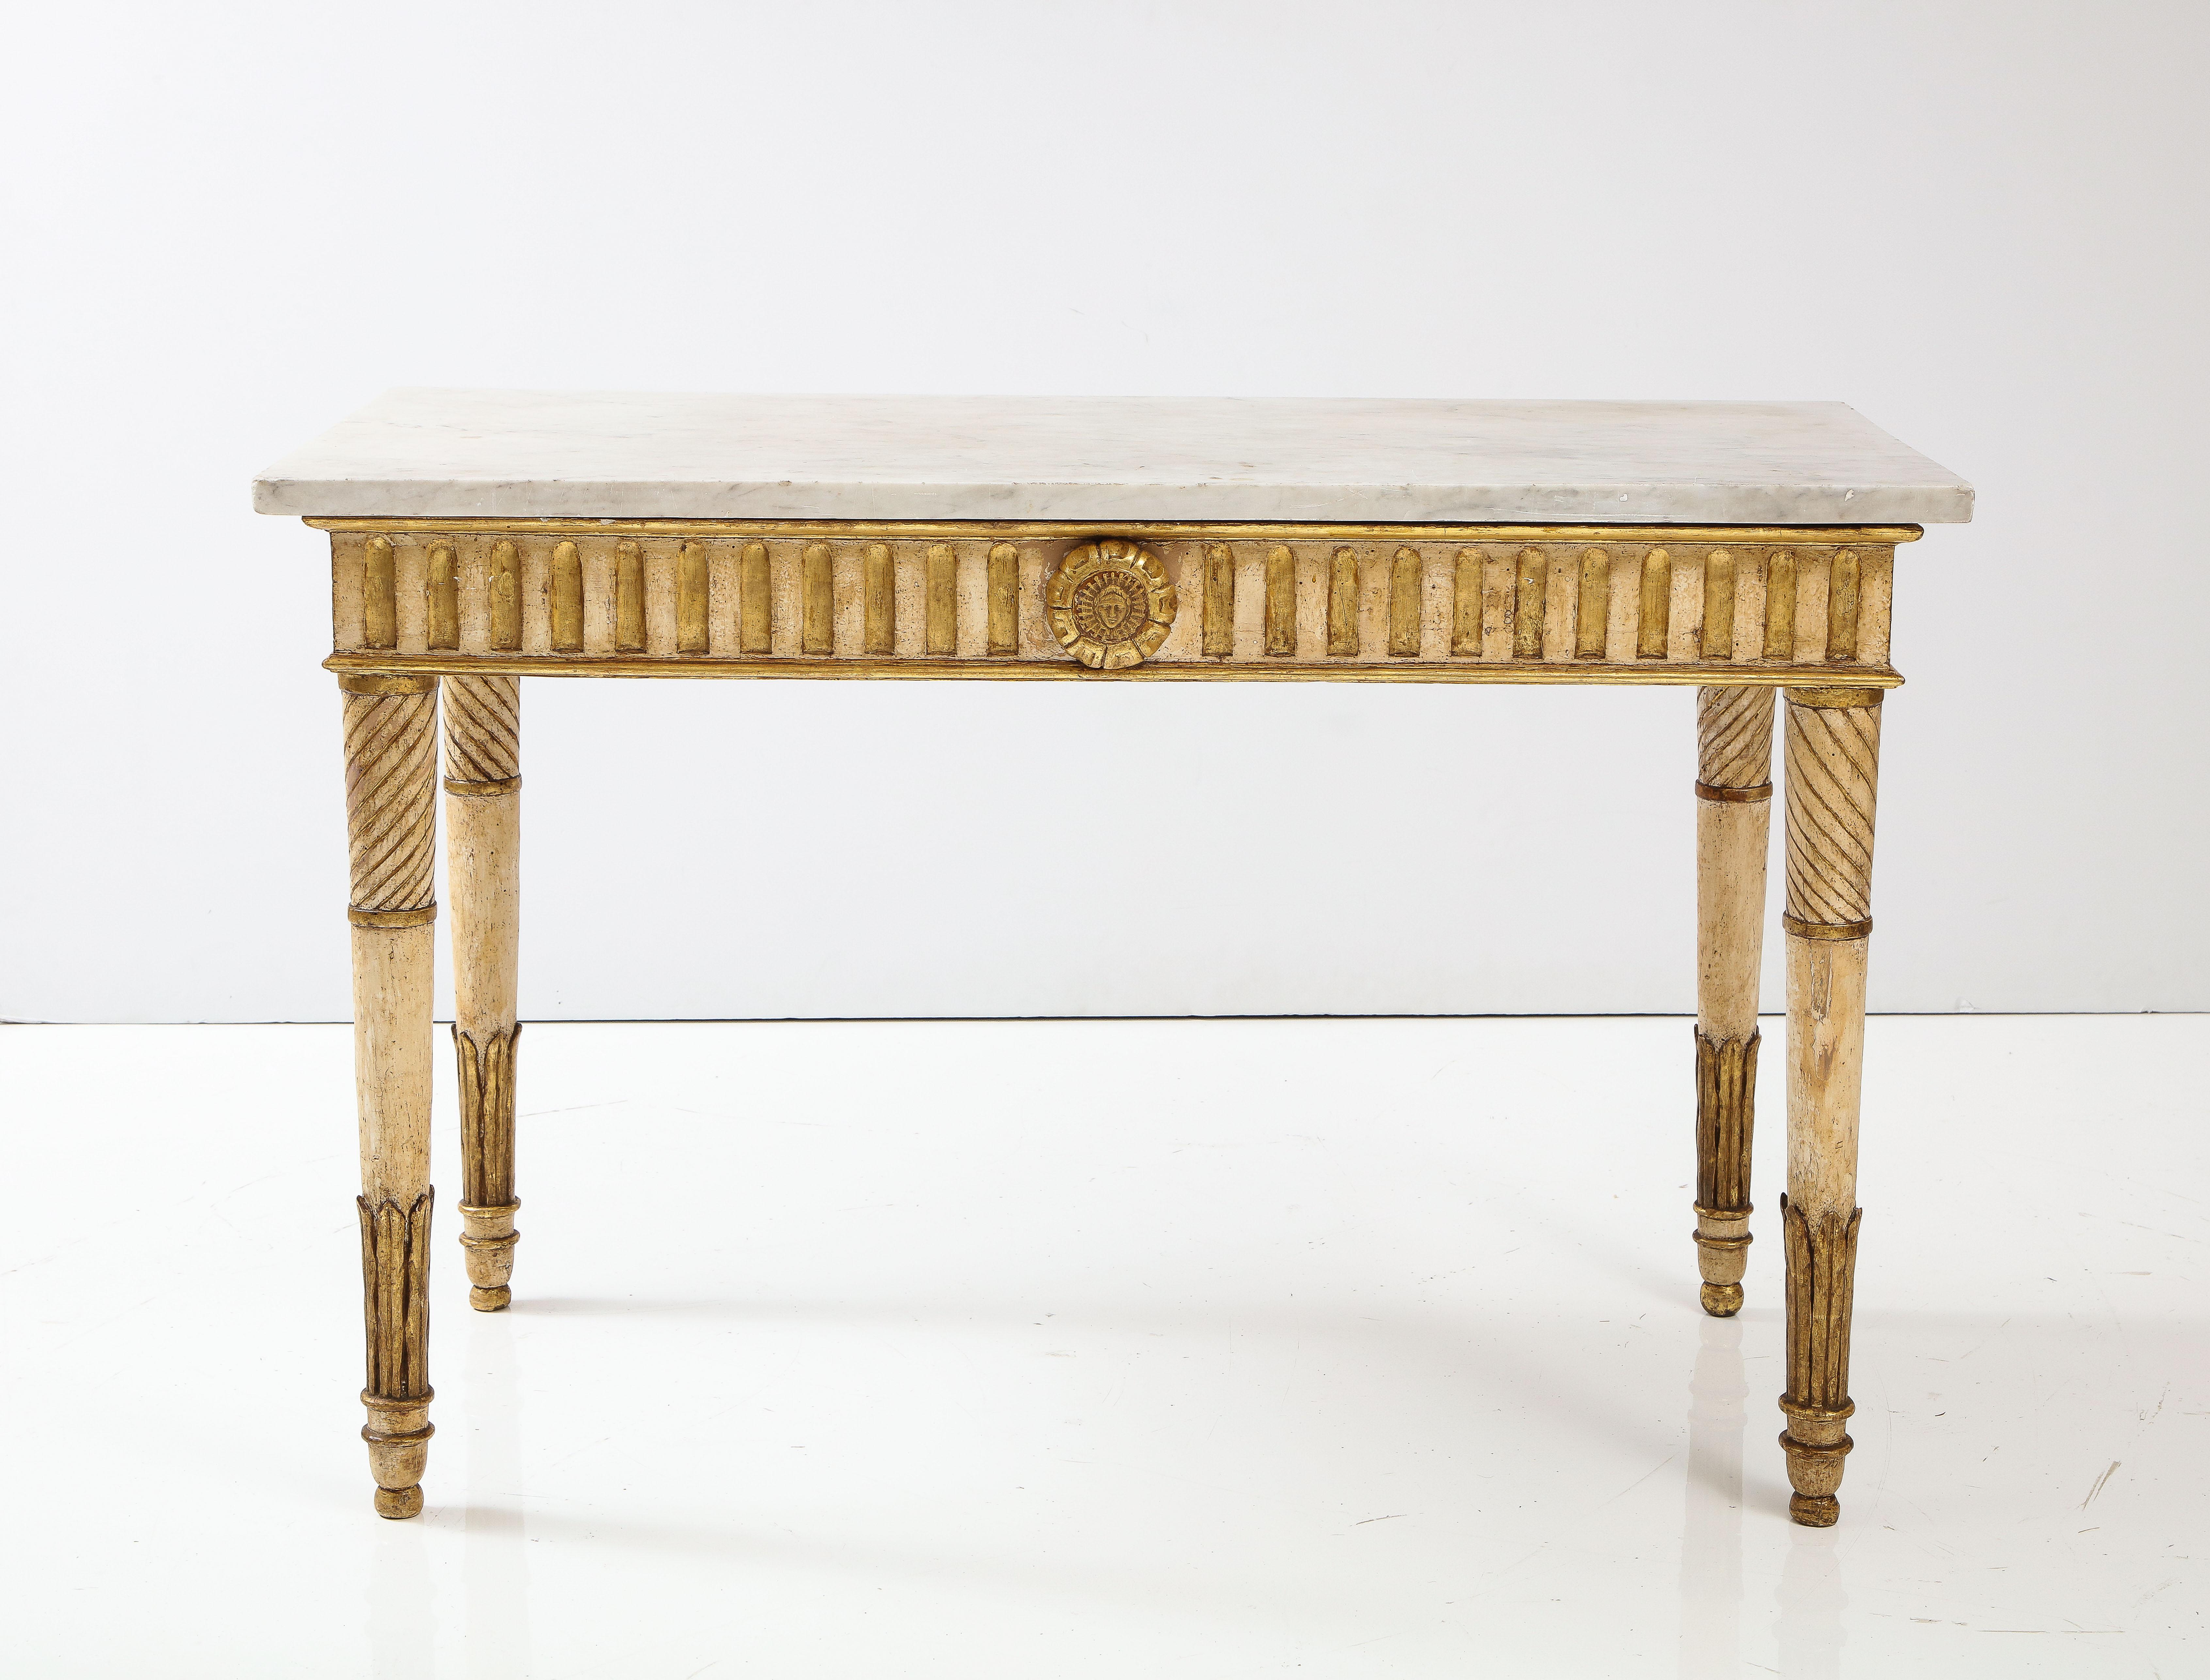 An exquisite and extremely elegant Italian 18th century Louis XVI period carved, painted and gilded wood Neoclassical console table, with original Carrara white marble top. The freestanding console is raised by circular tapered legs with acanthus